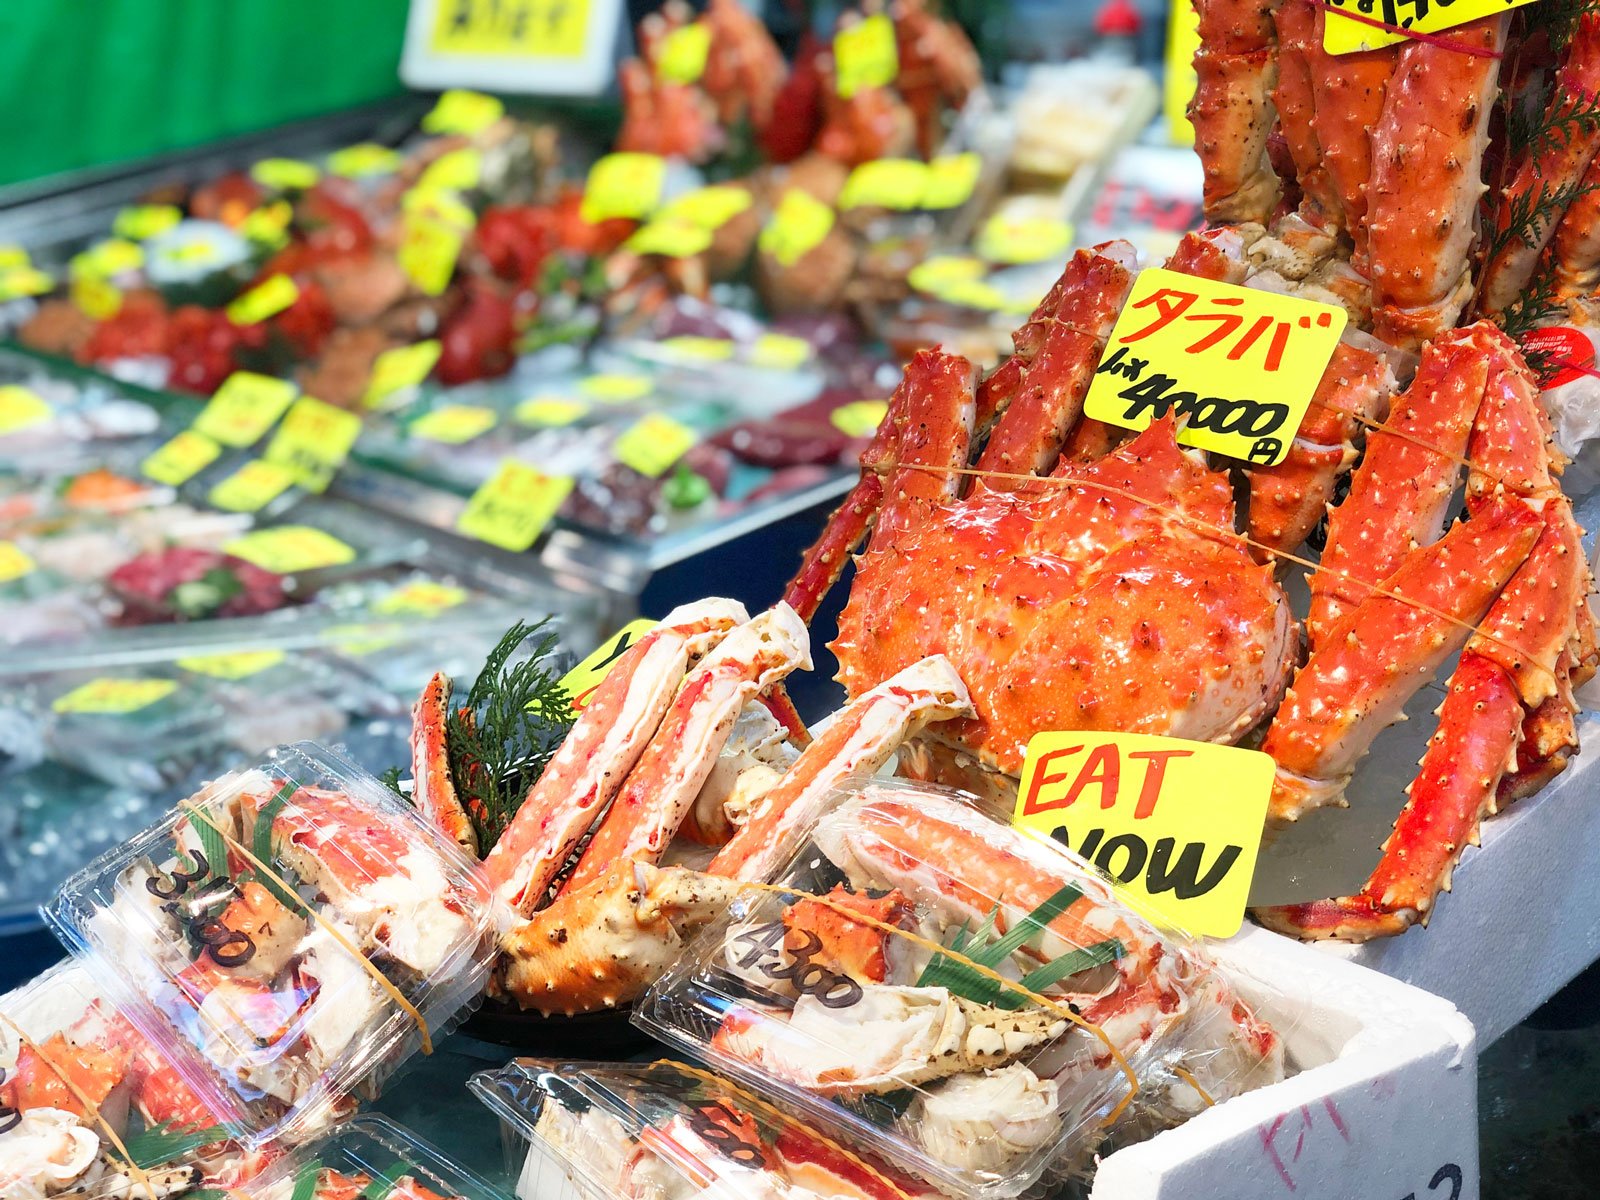 Hokkaido is renowned for its fresh seafood